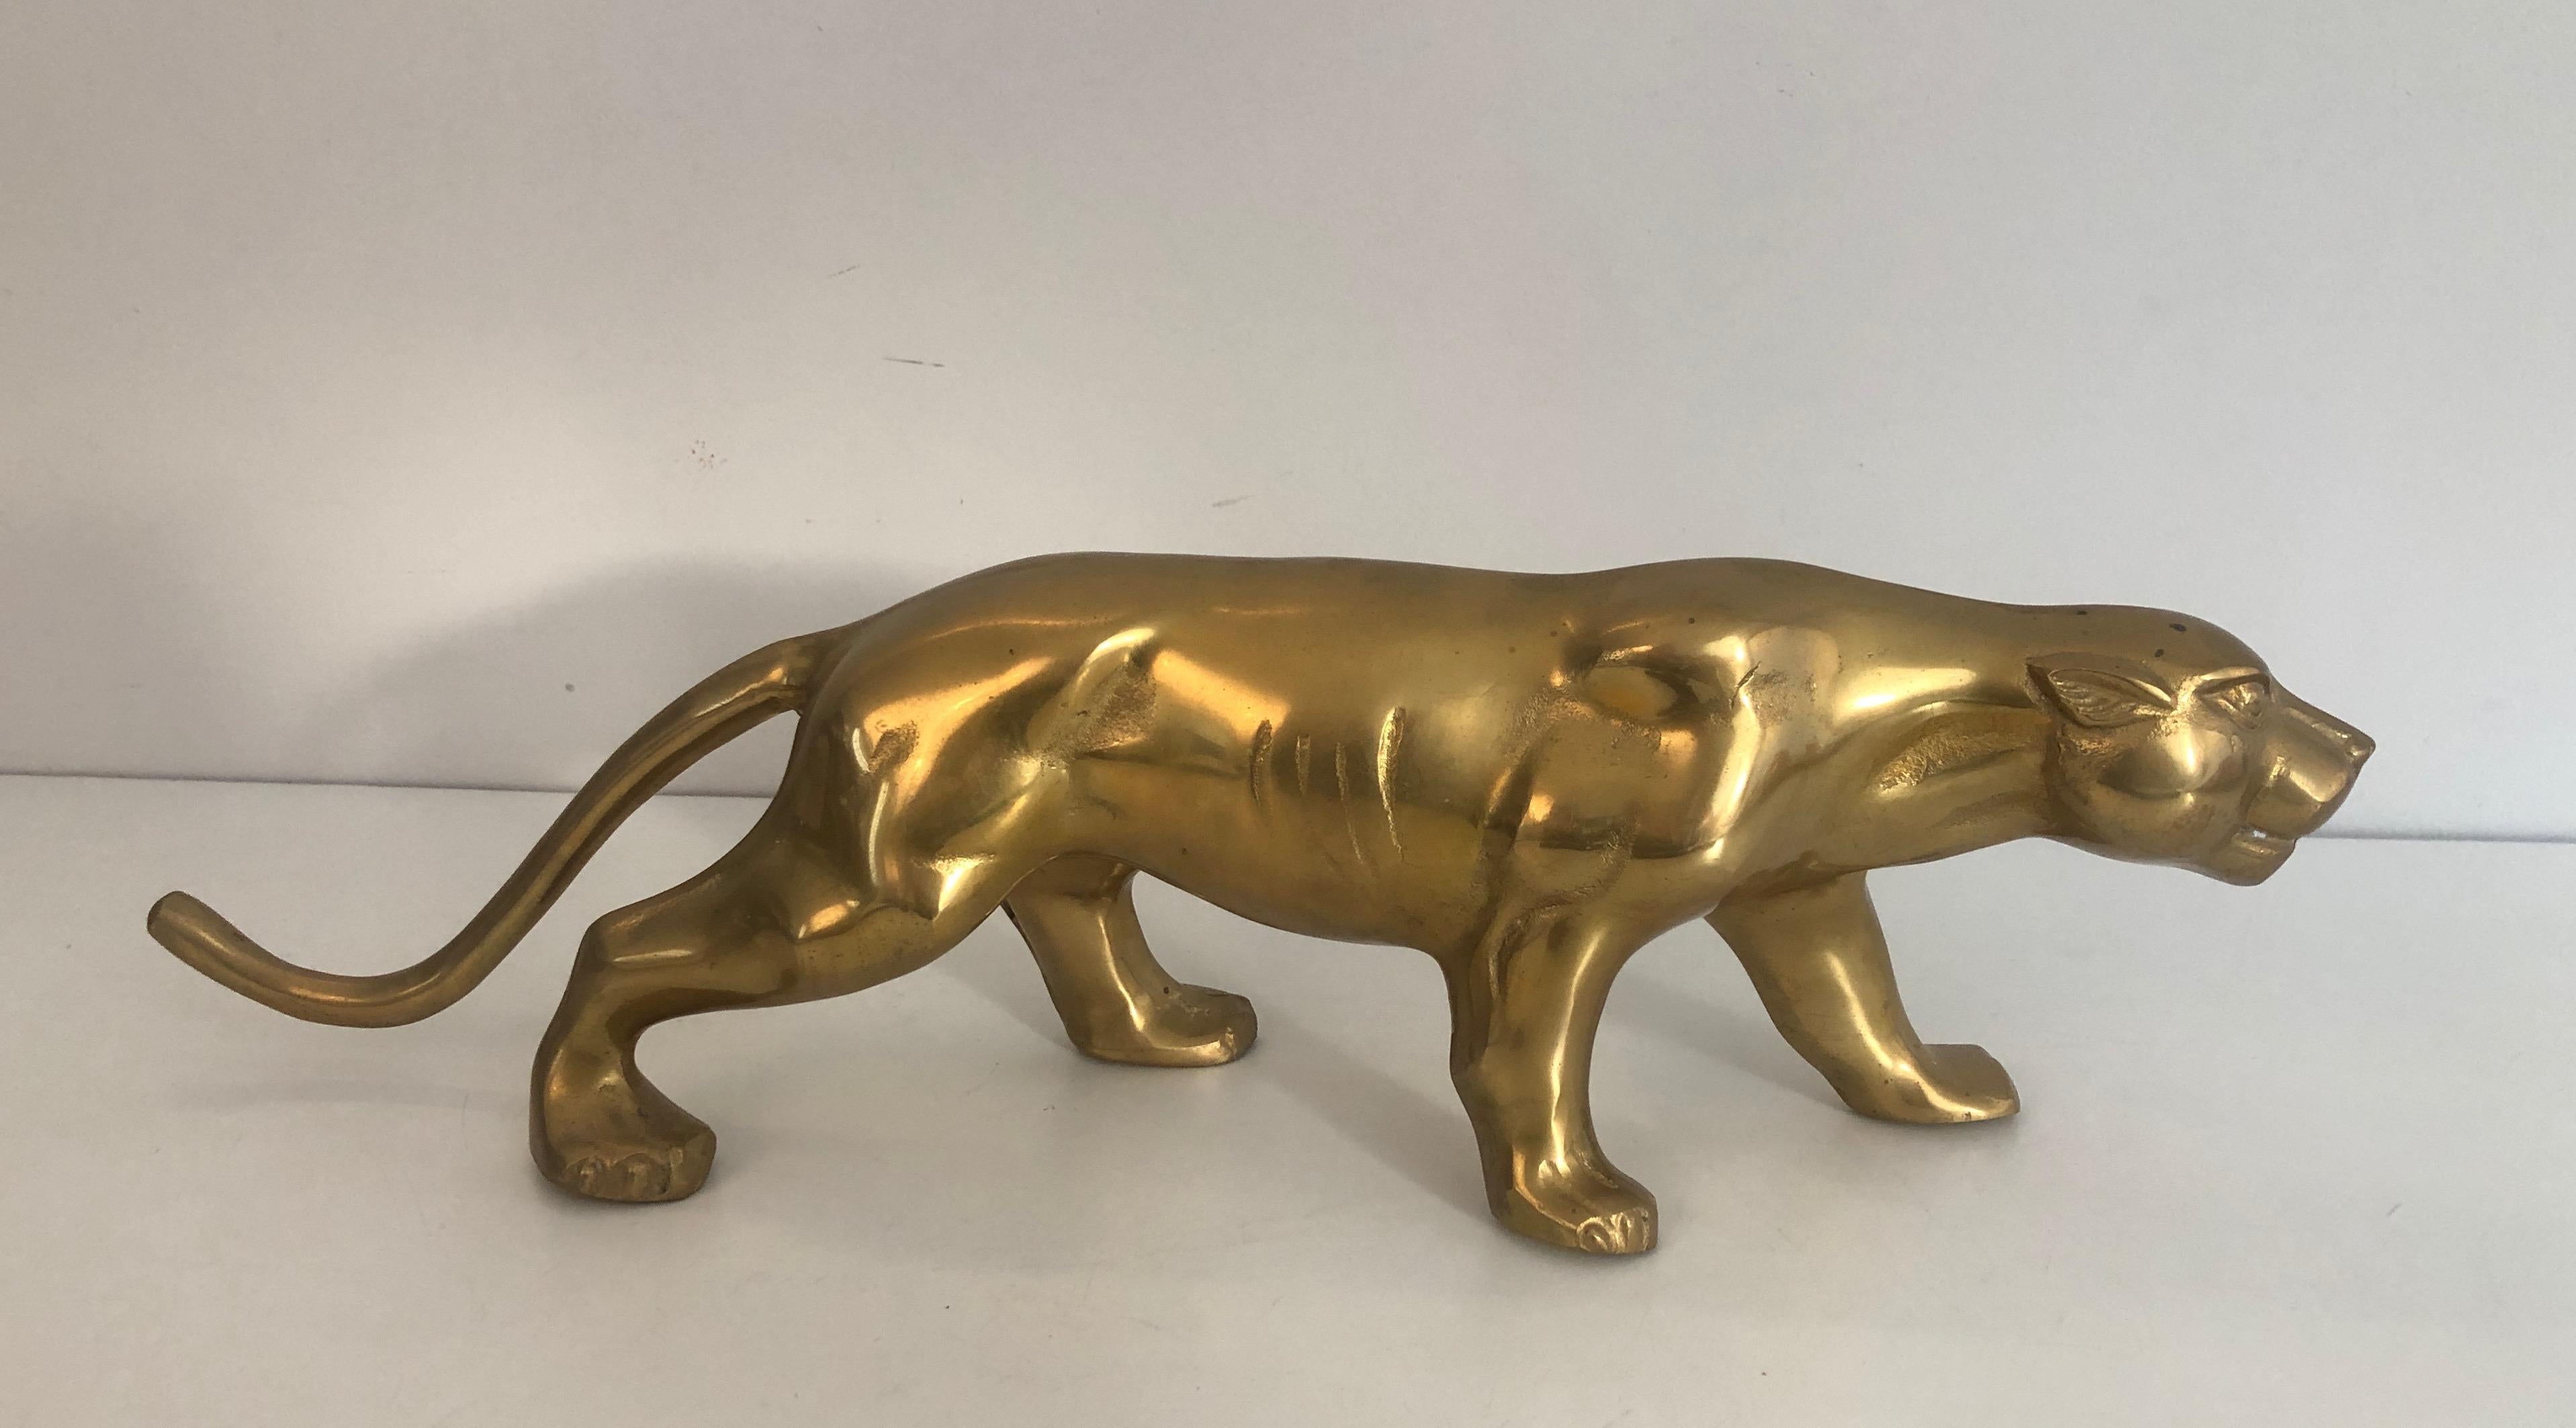 This very nice Tiger sculpture is made of brass. This is a French work, circa 1970.